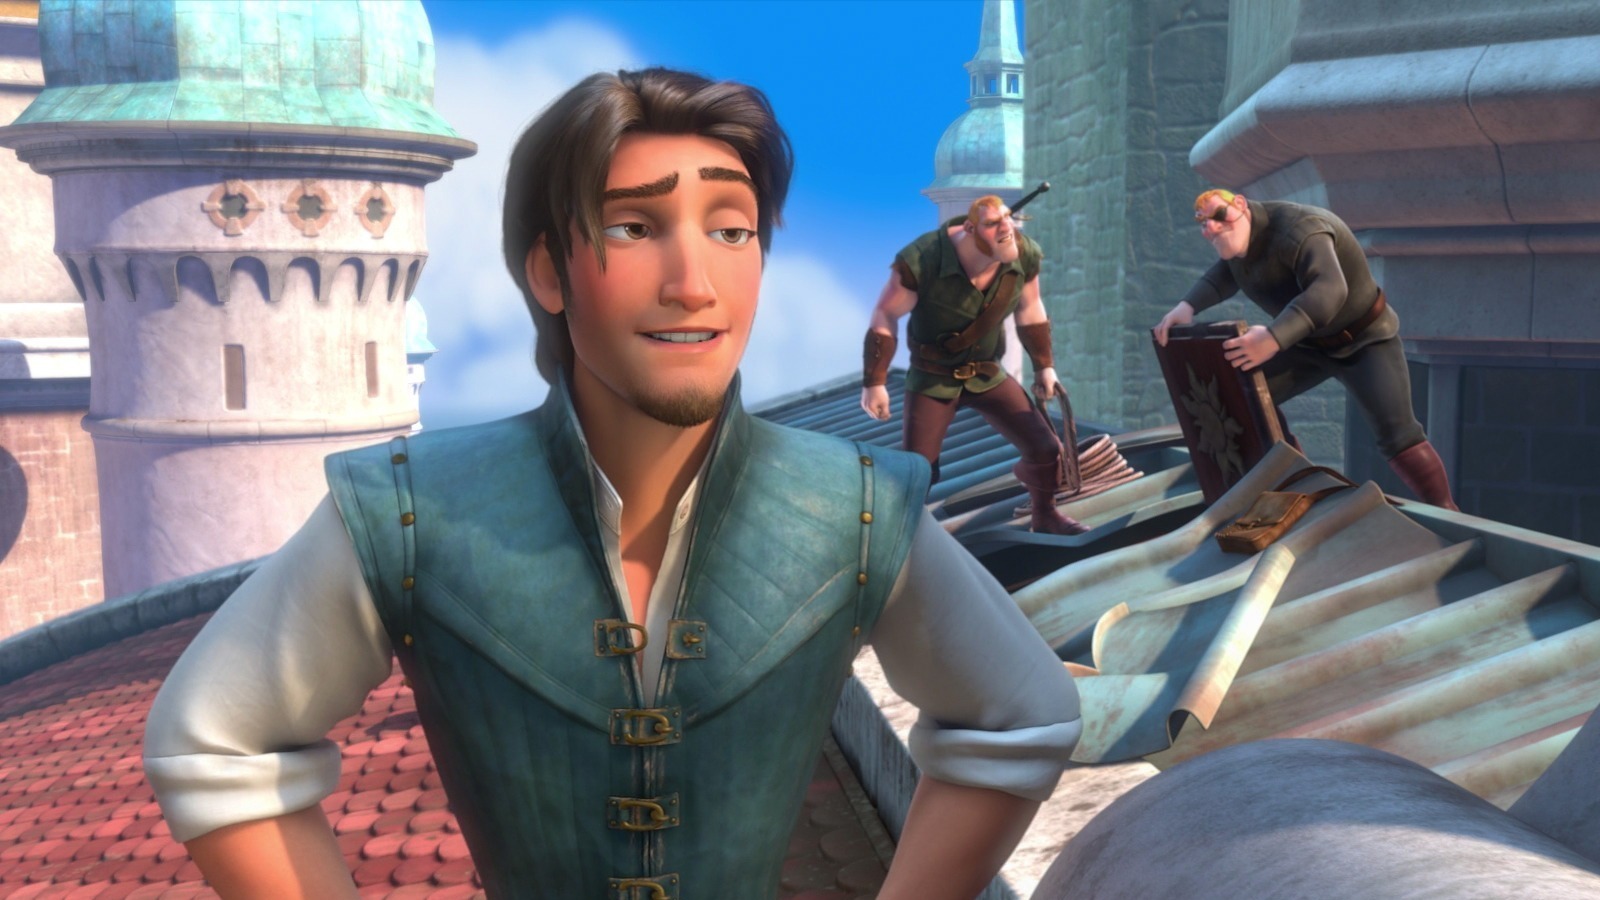 Male Disney Characters: A List of Fan Favorite Disney Men Characters Of All Time - Flynn Rider - Tangled.